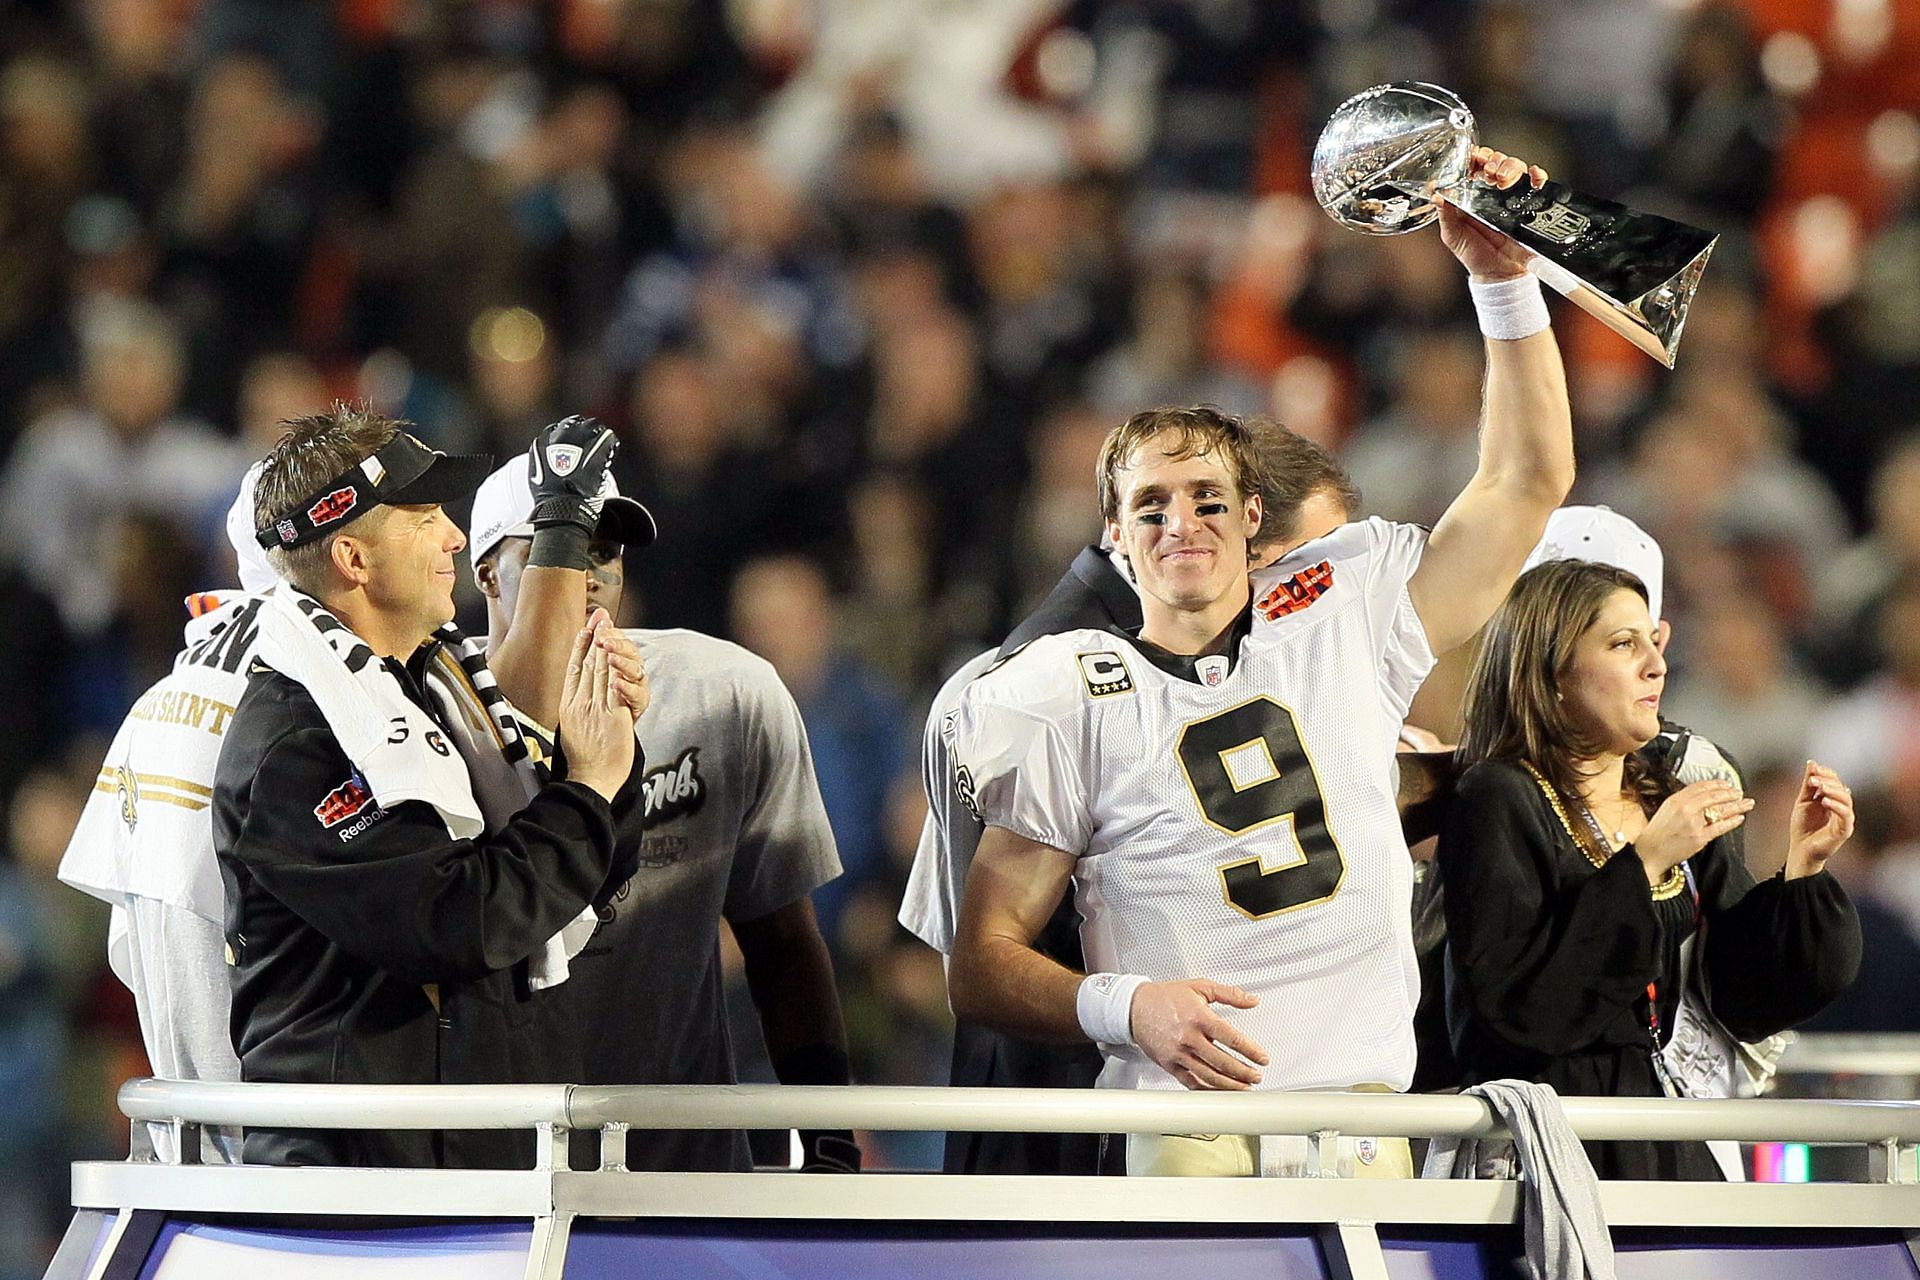 Brees leading the Saints to their win in Super Bowl XLIV